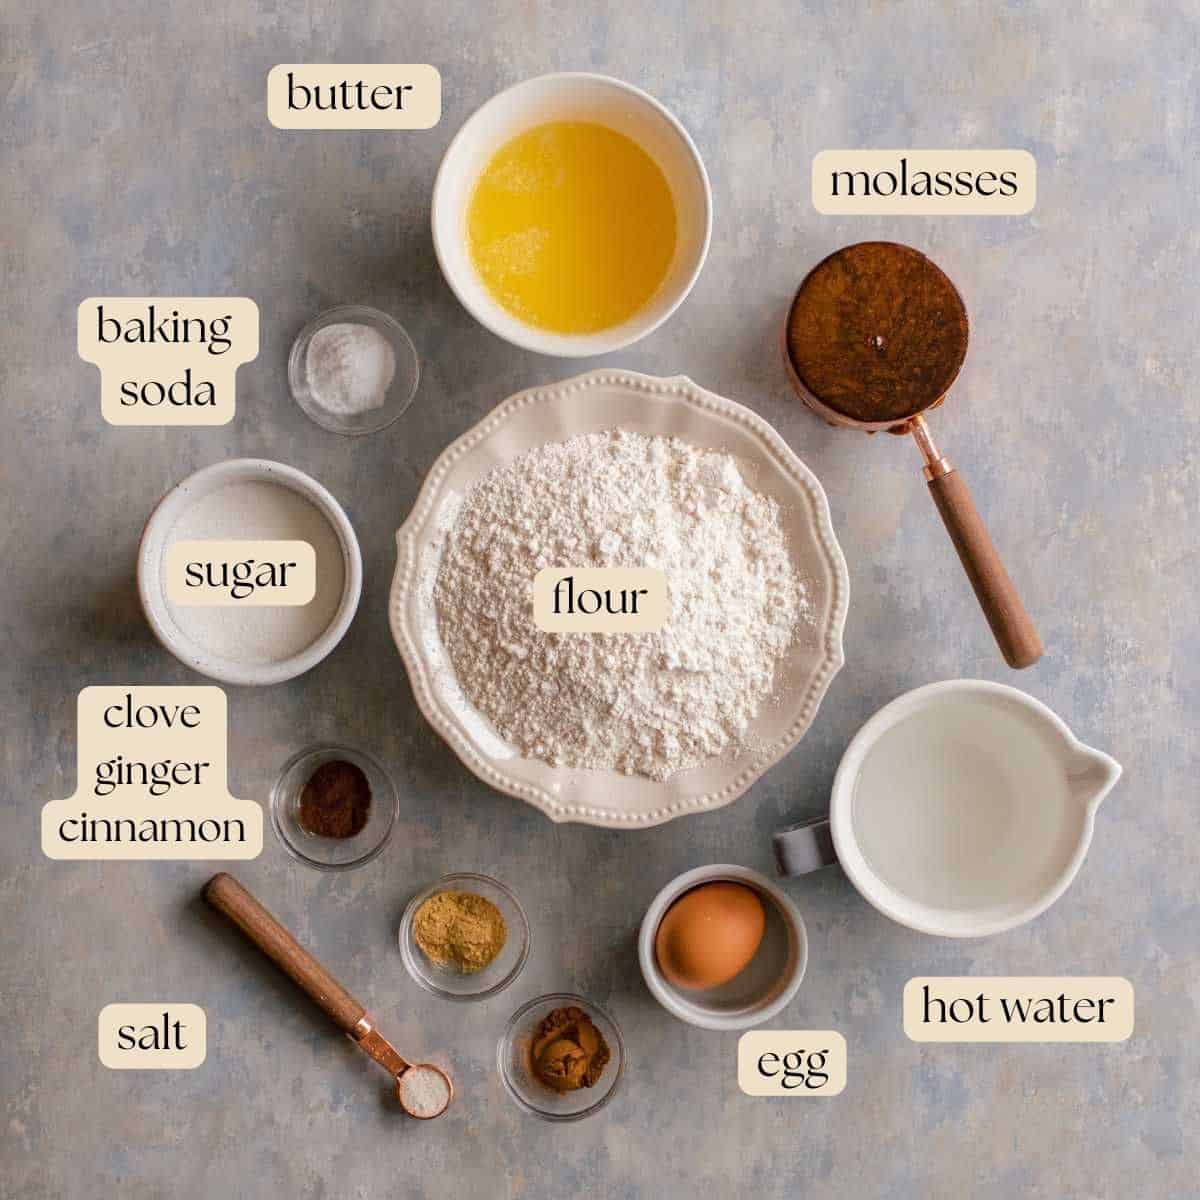 Ingredients to make gingerbread bundt cake in measuring spoons, pinch bowls, bowls and measuring cups.